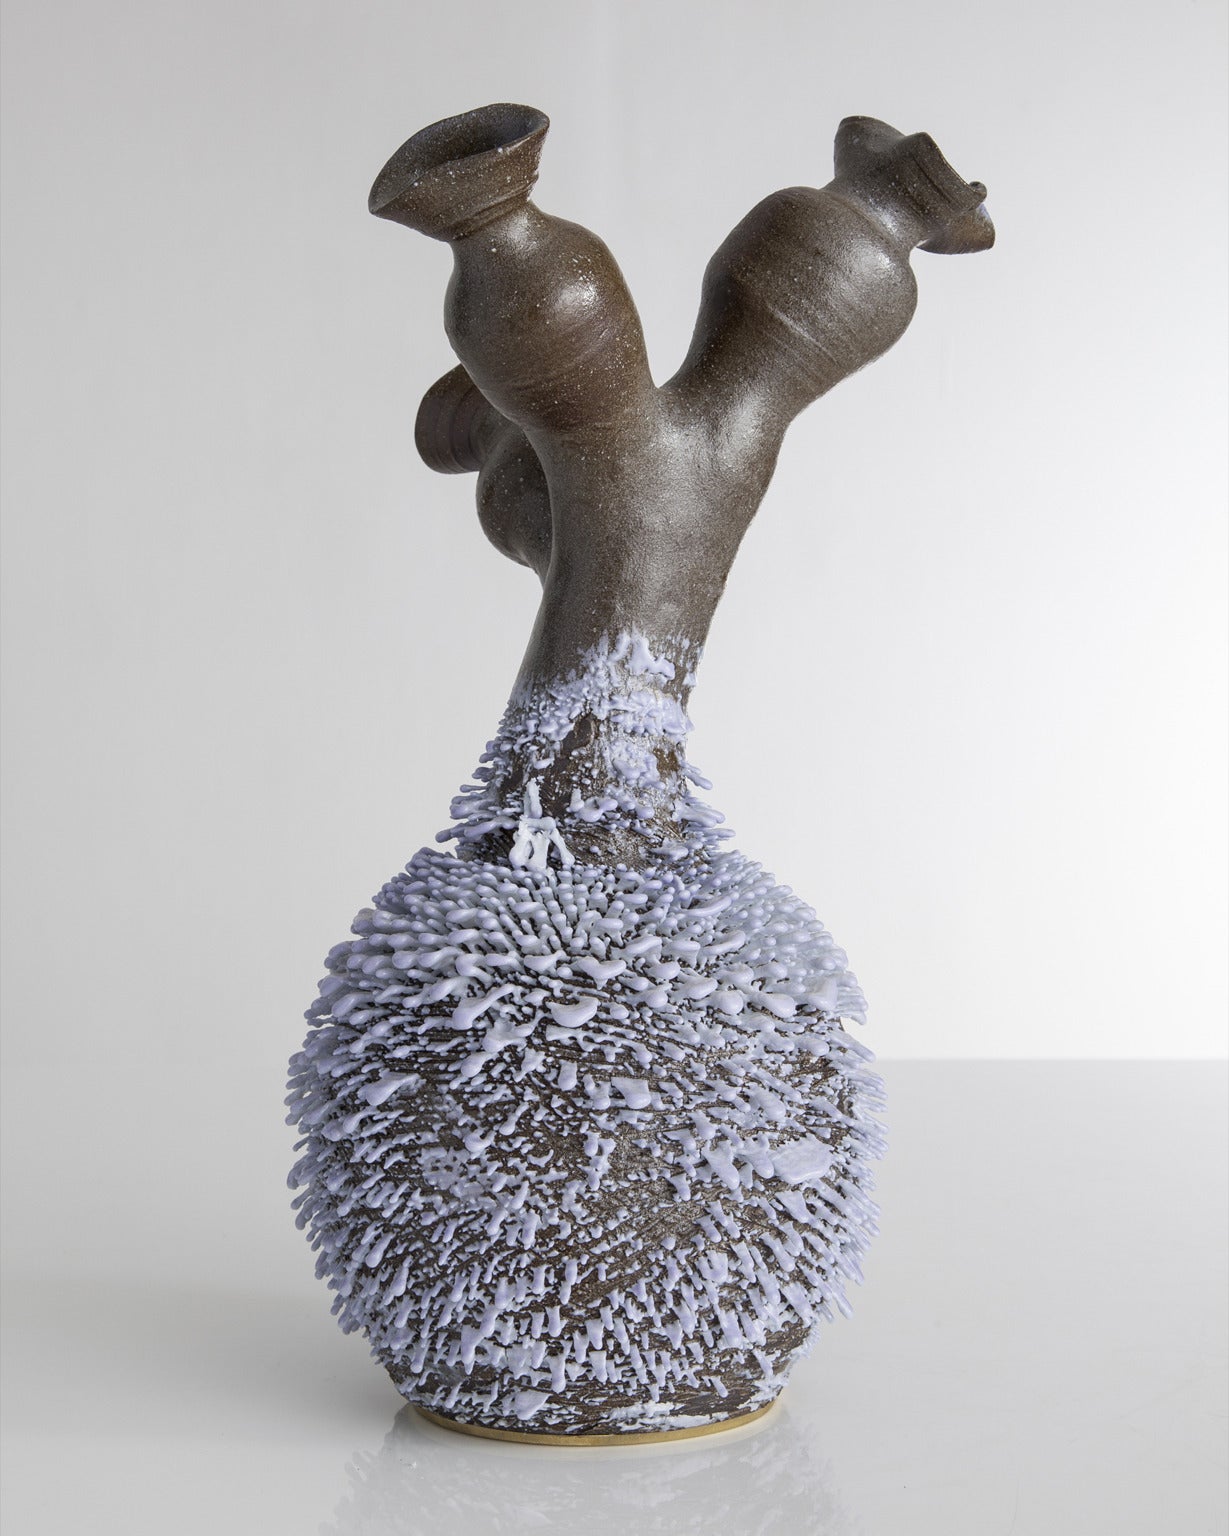 Dark Father Accretion Vase - Sculpture by The Haas Brothers